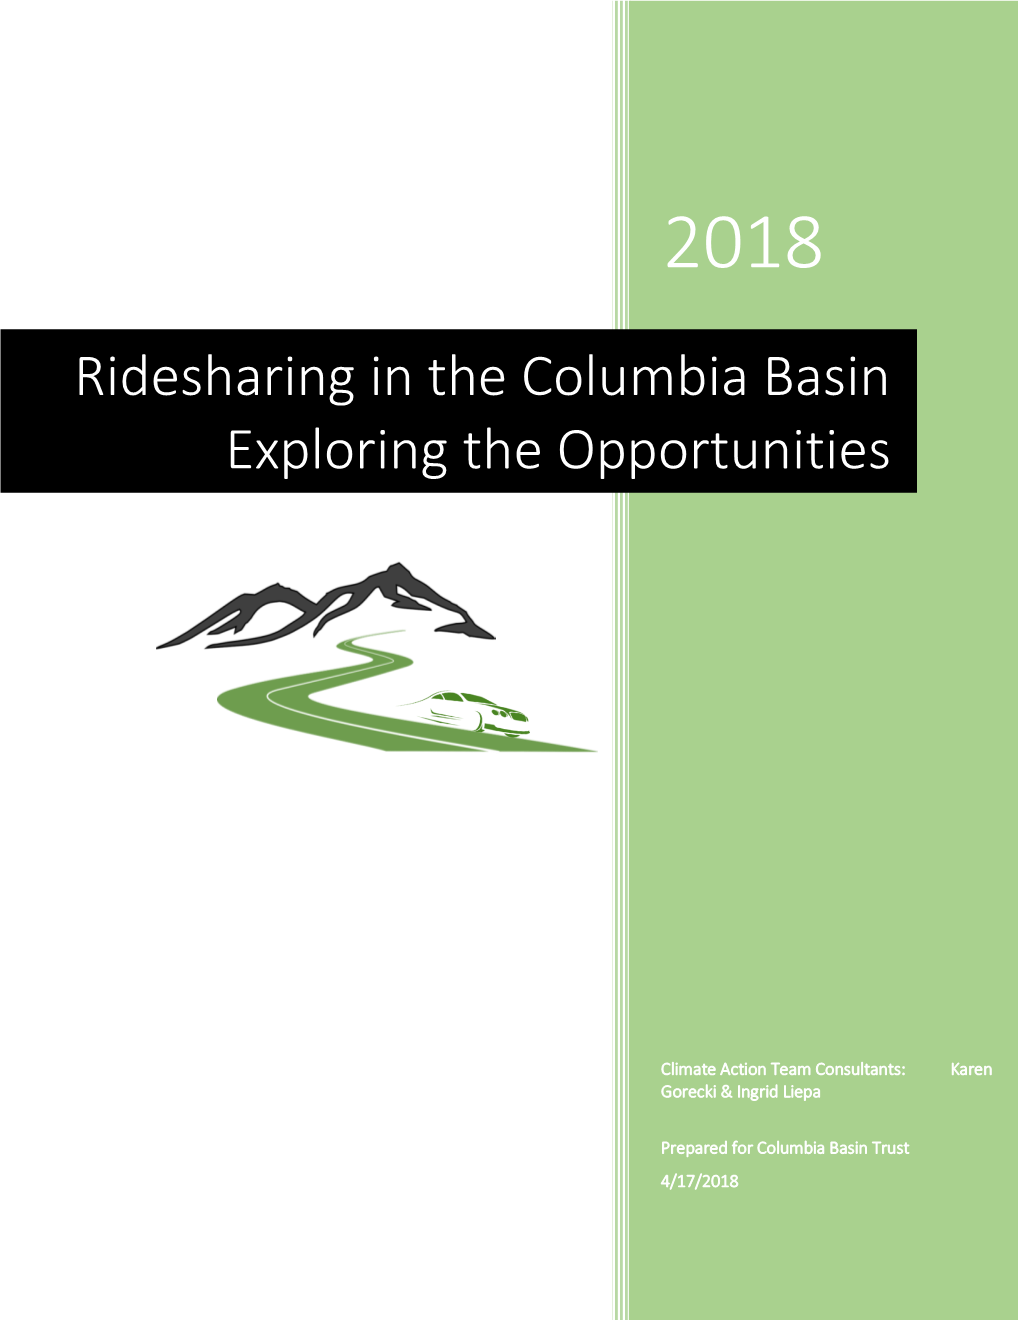 Ridesharing in the Columbia Basin Exploring the Opportunities